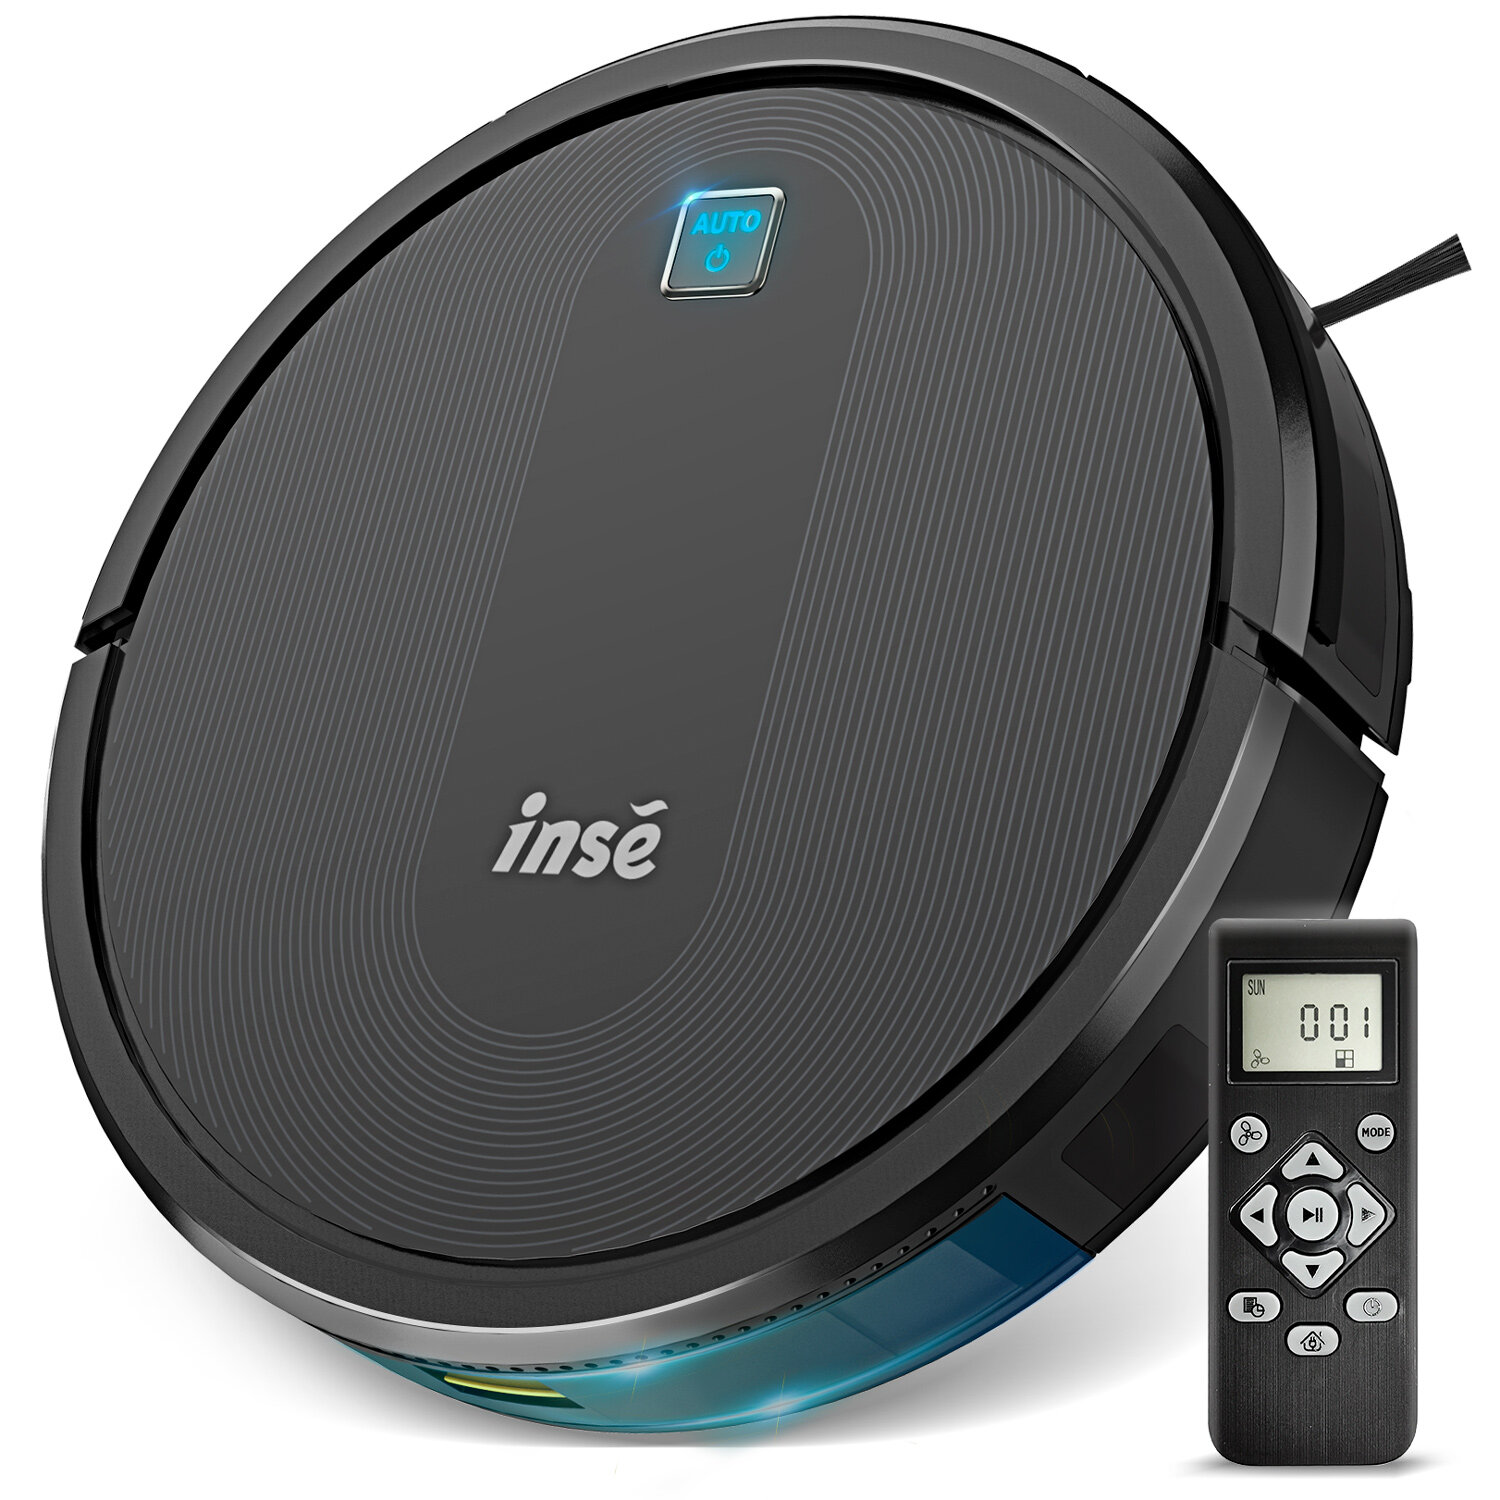 INSE E6 Robot Vacuum Cleaner 2200Pa Strong Suction 2600mAh Battery Life 4 Cleaning Modes for Pet Hair, Hard Floors, Carp